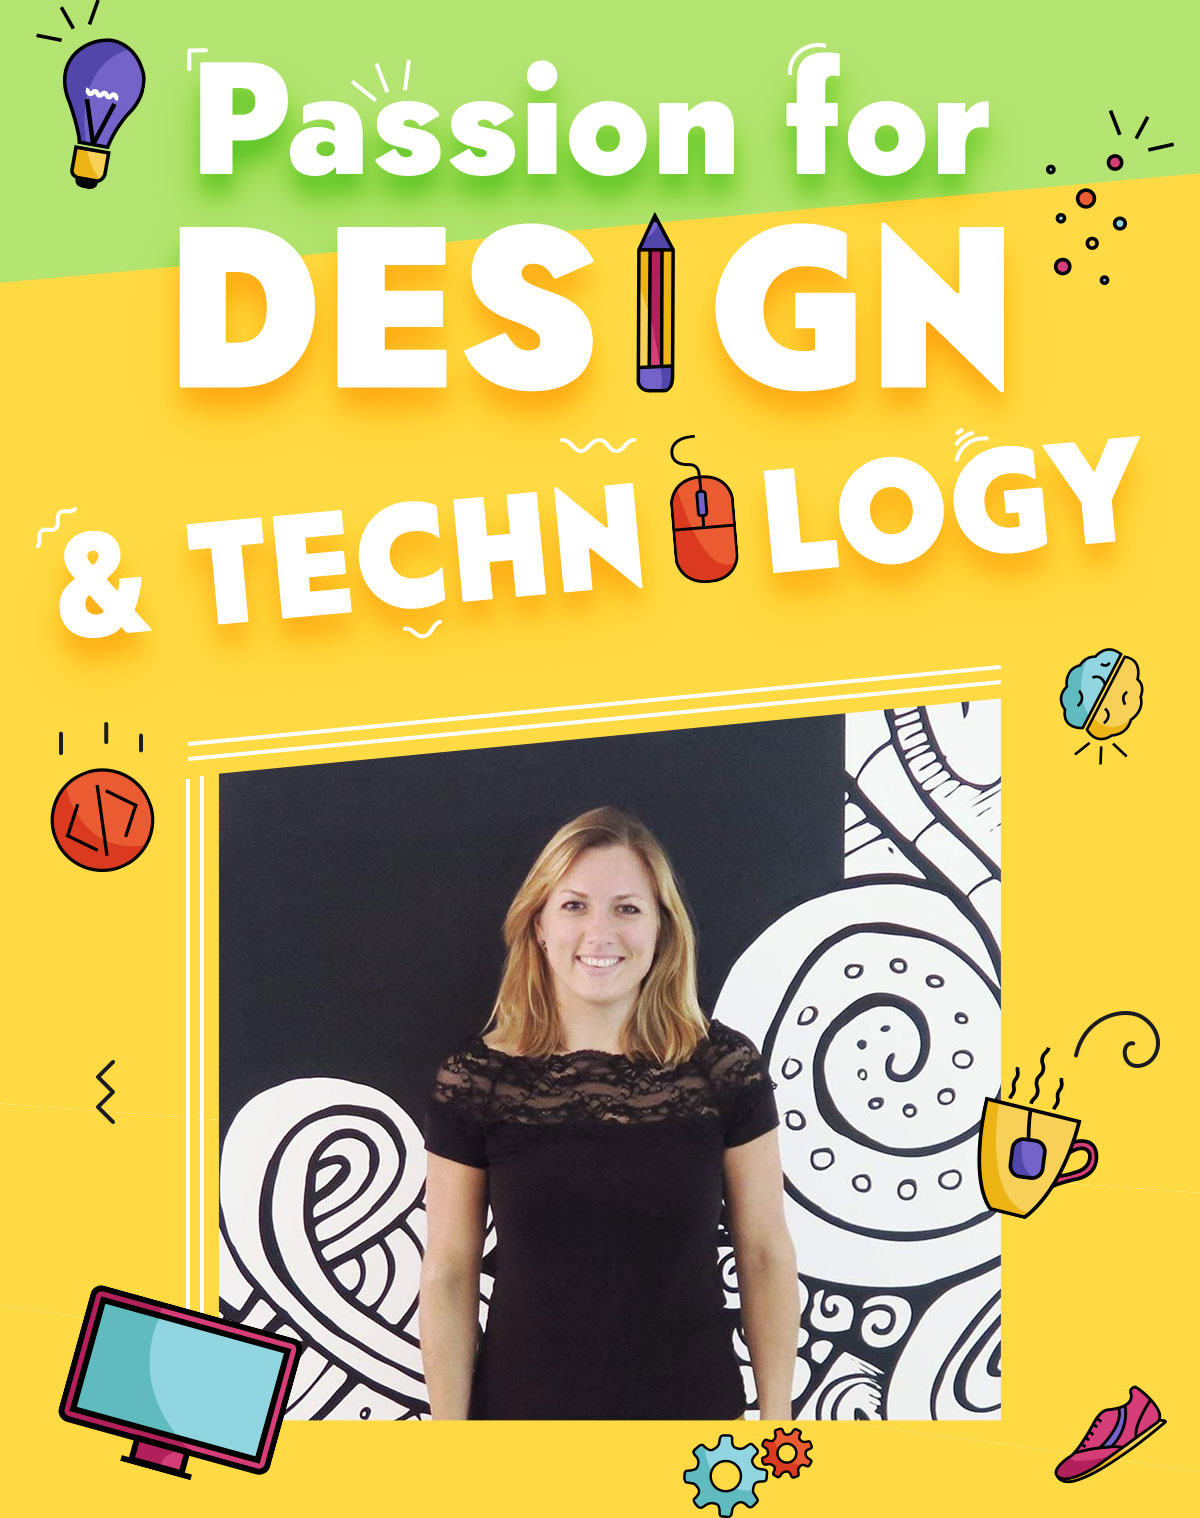 Passion for design & technology